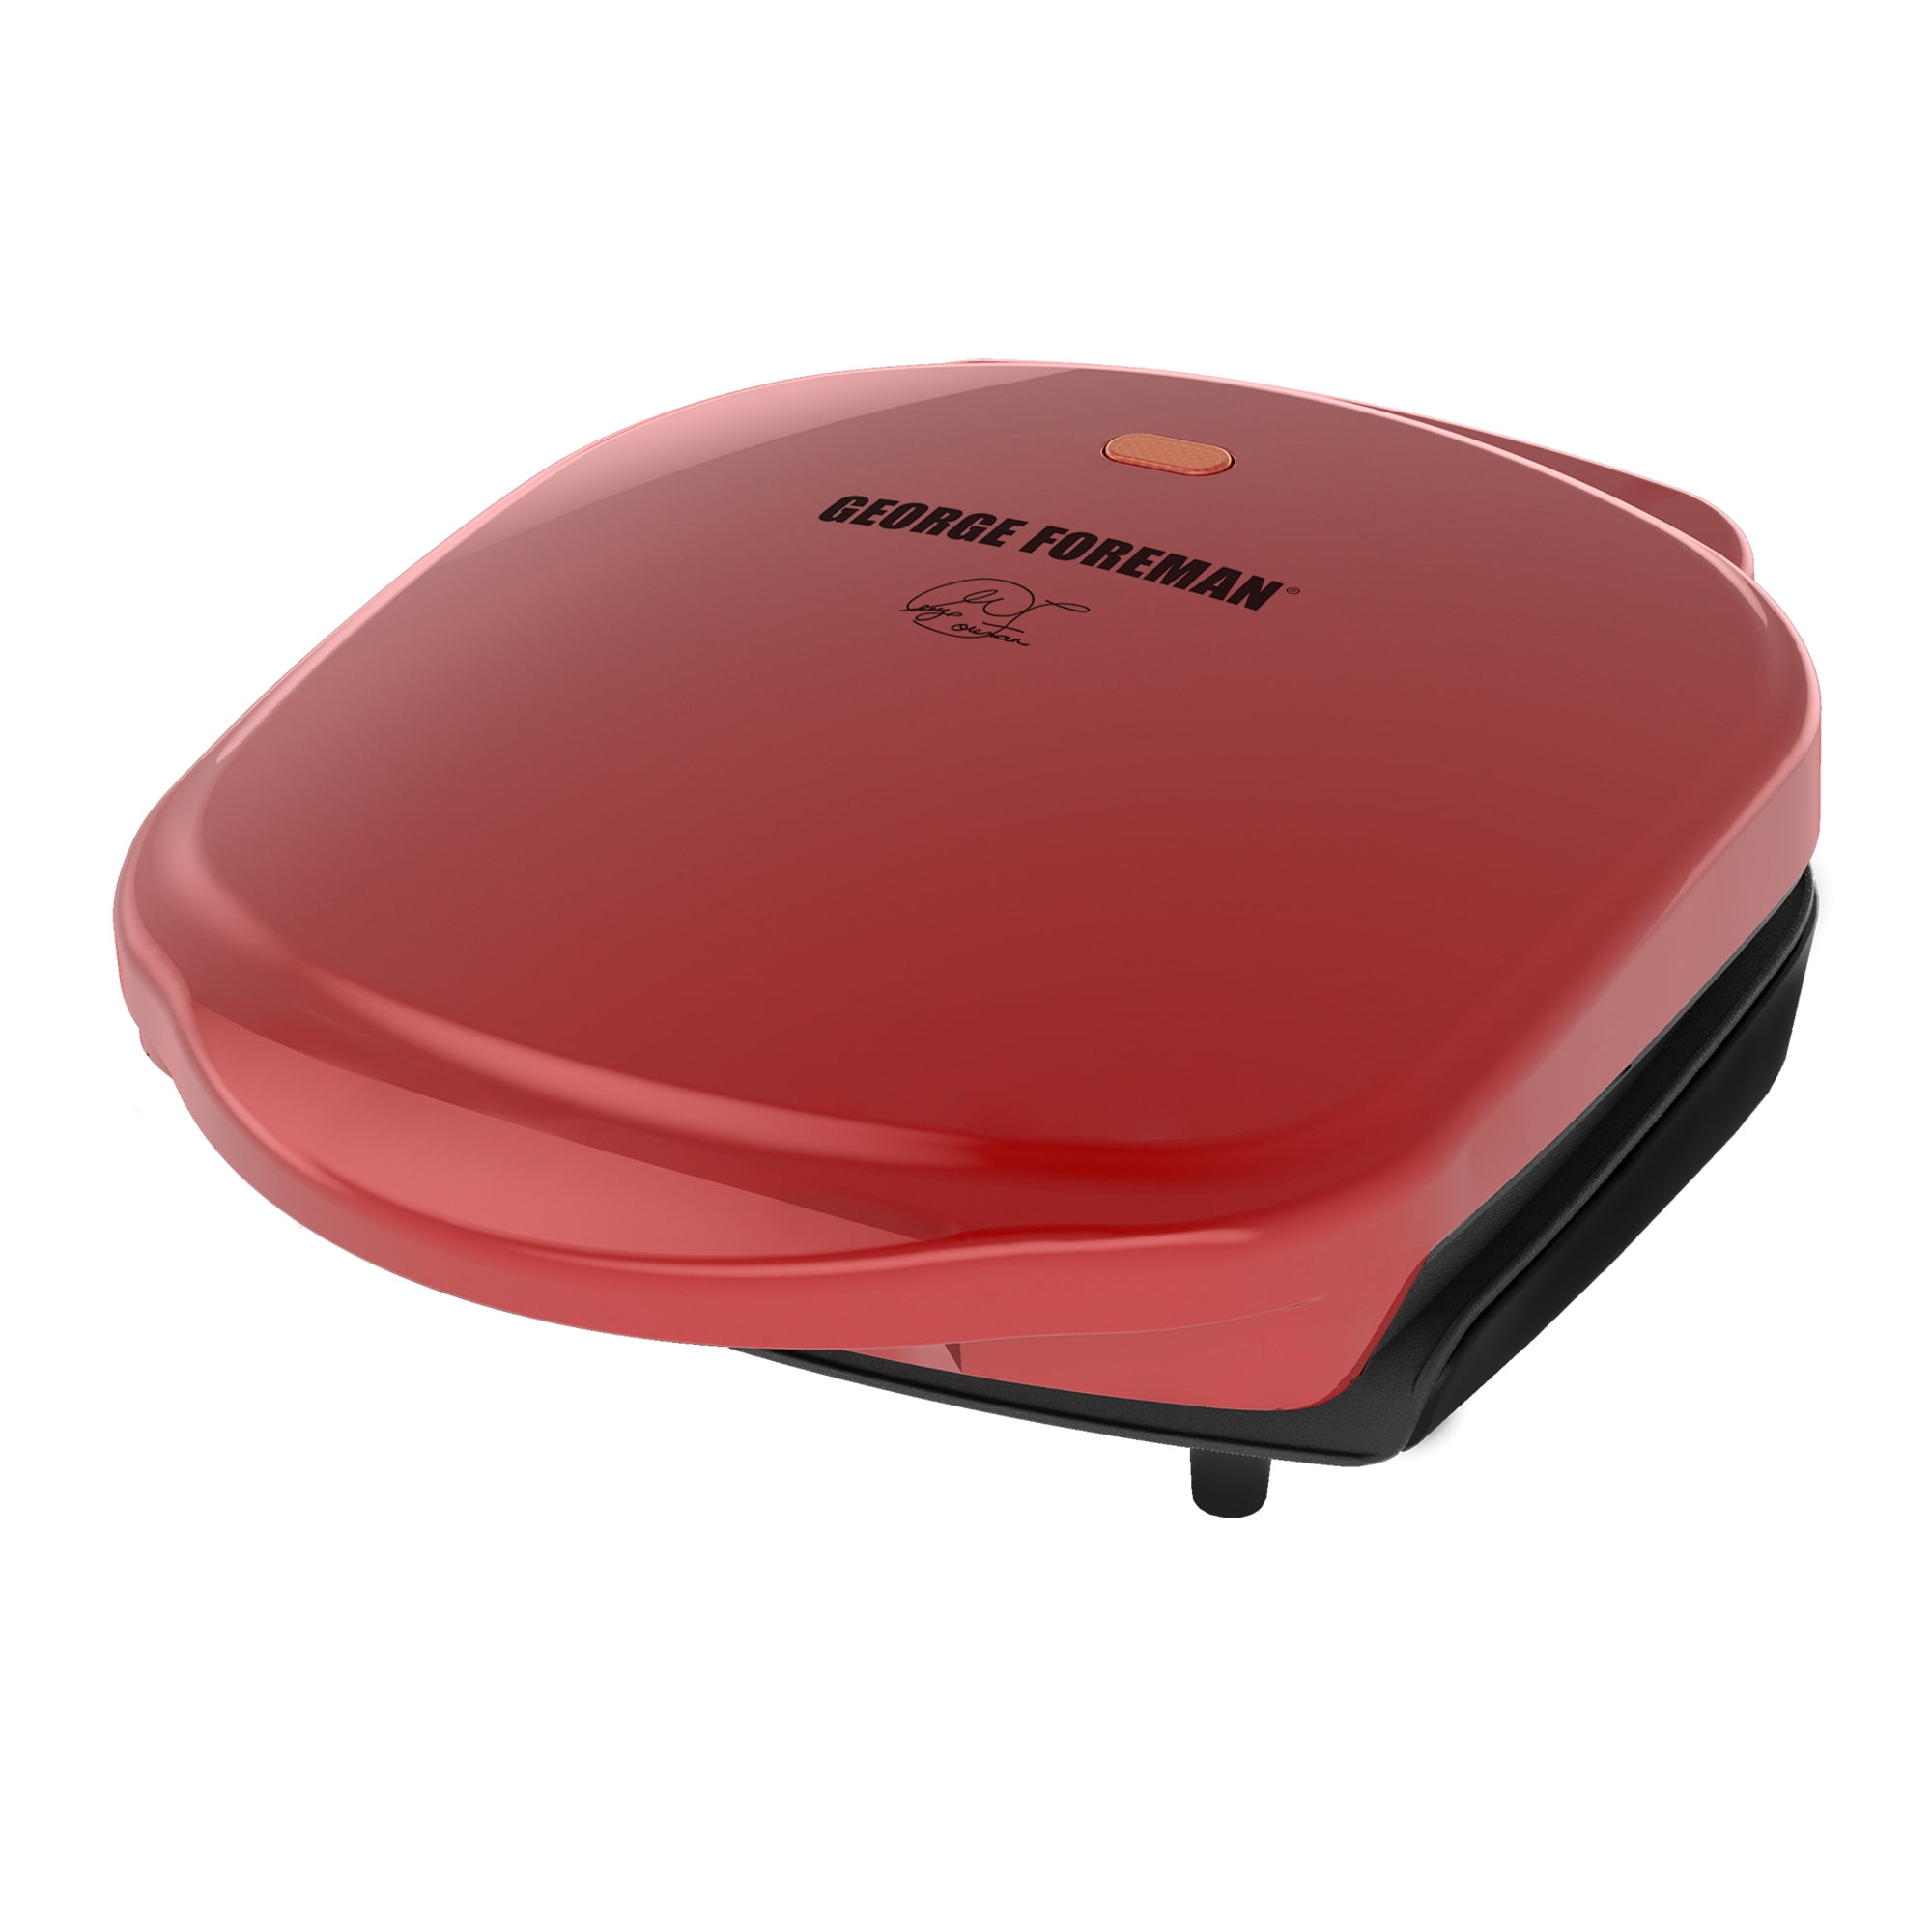 comb hire Atlas george foreman grill price On the head of Chip Pride